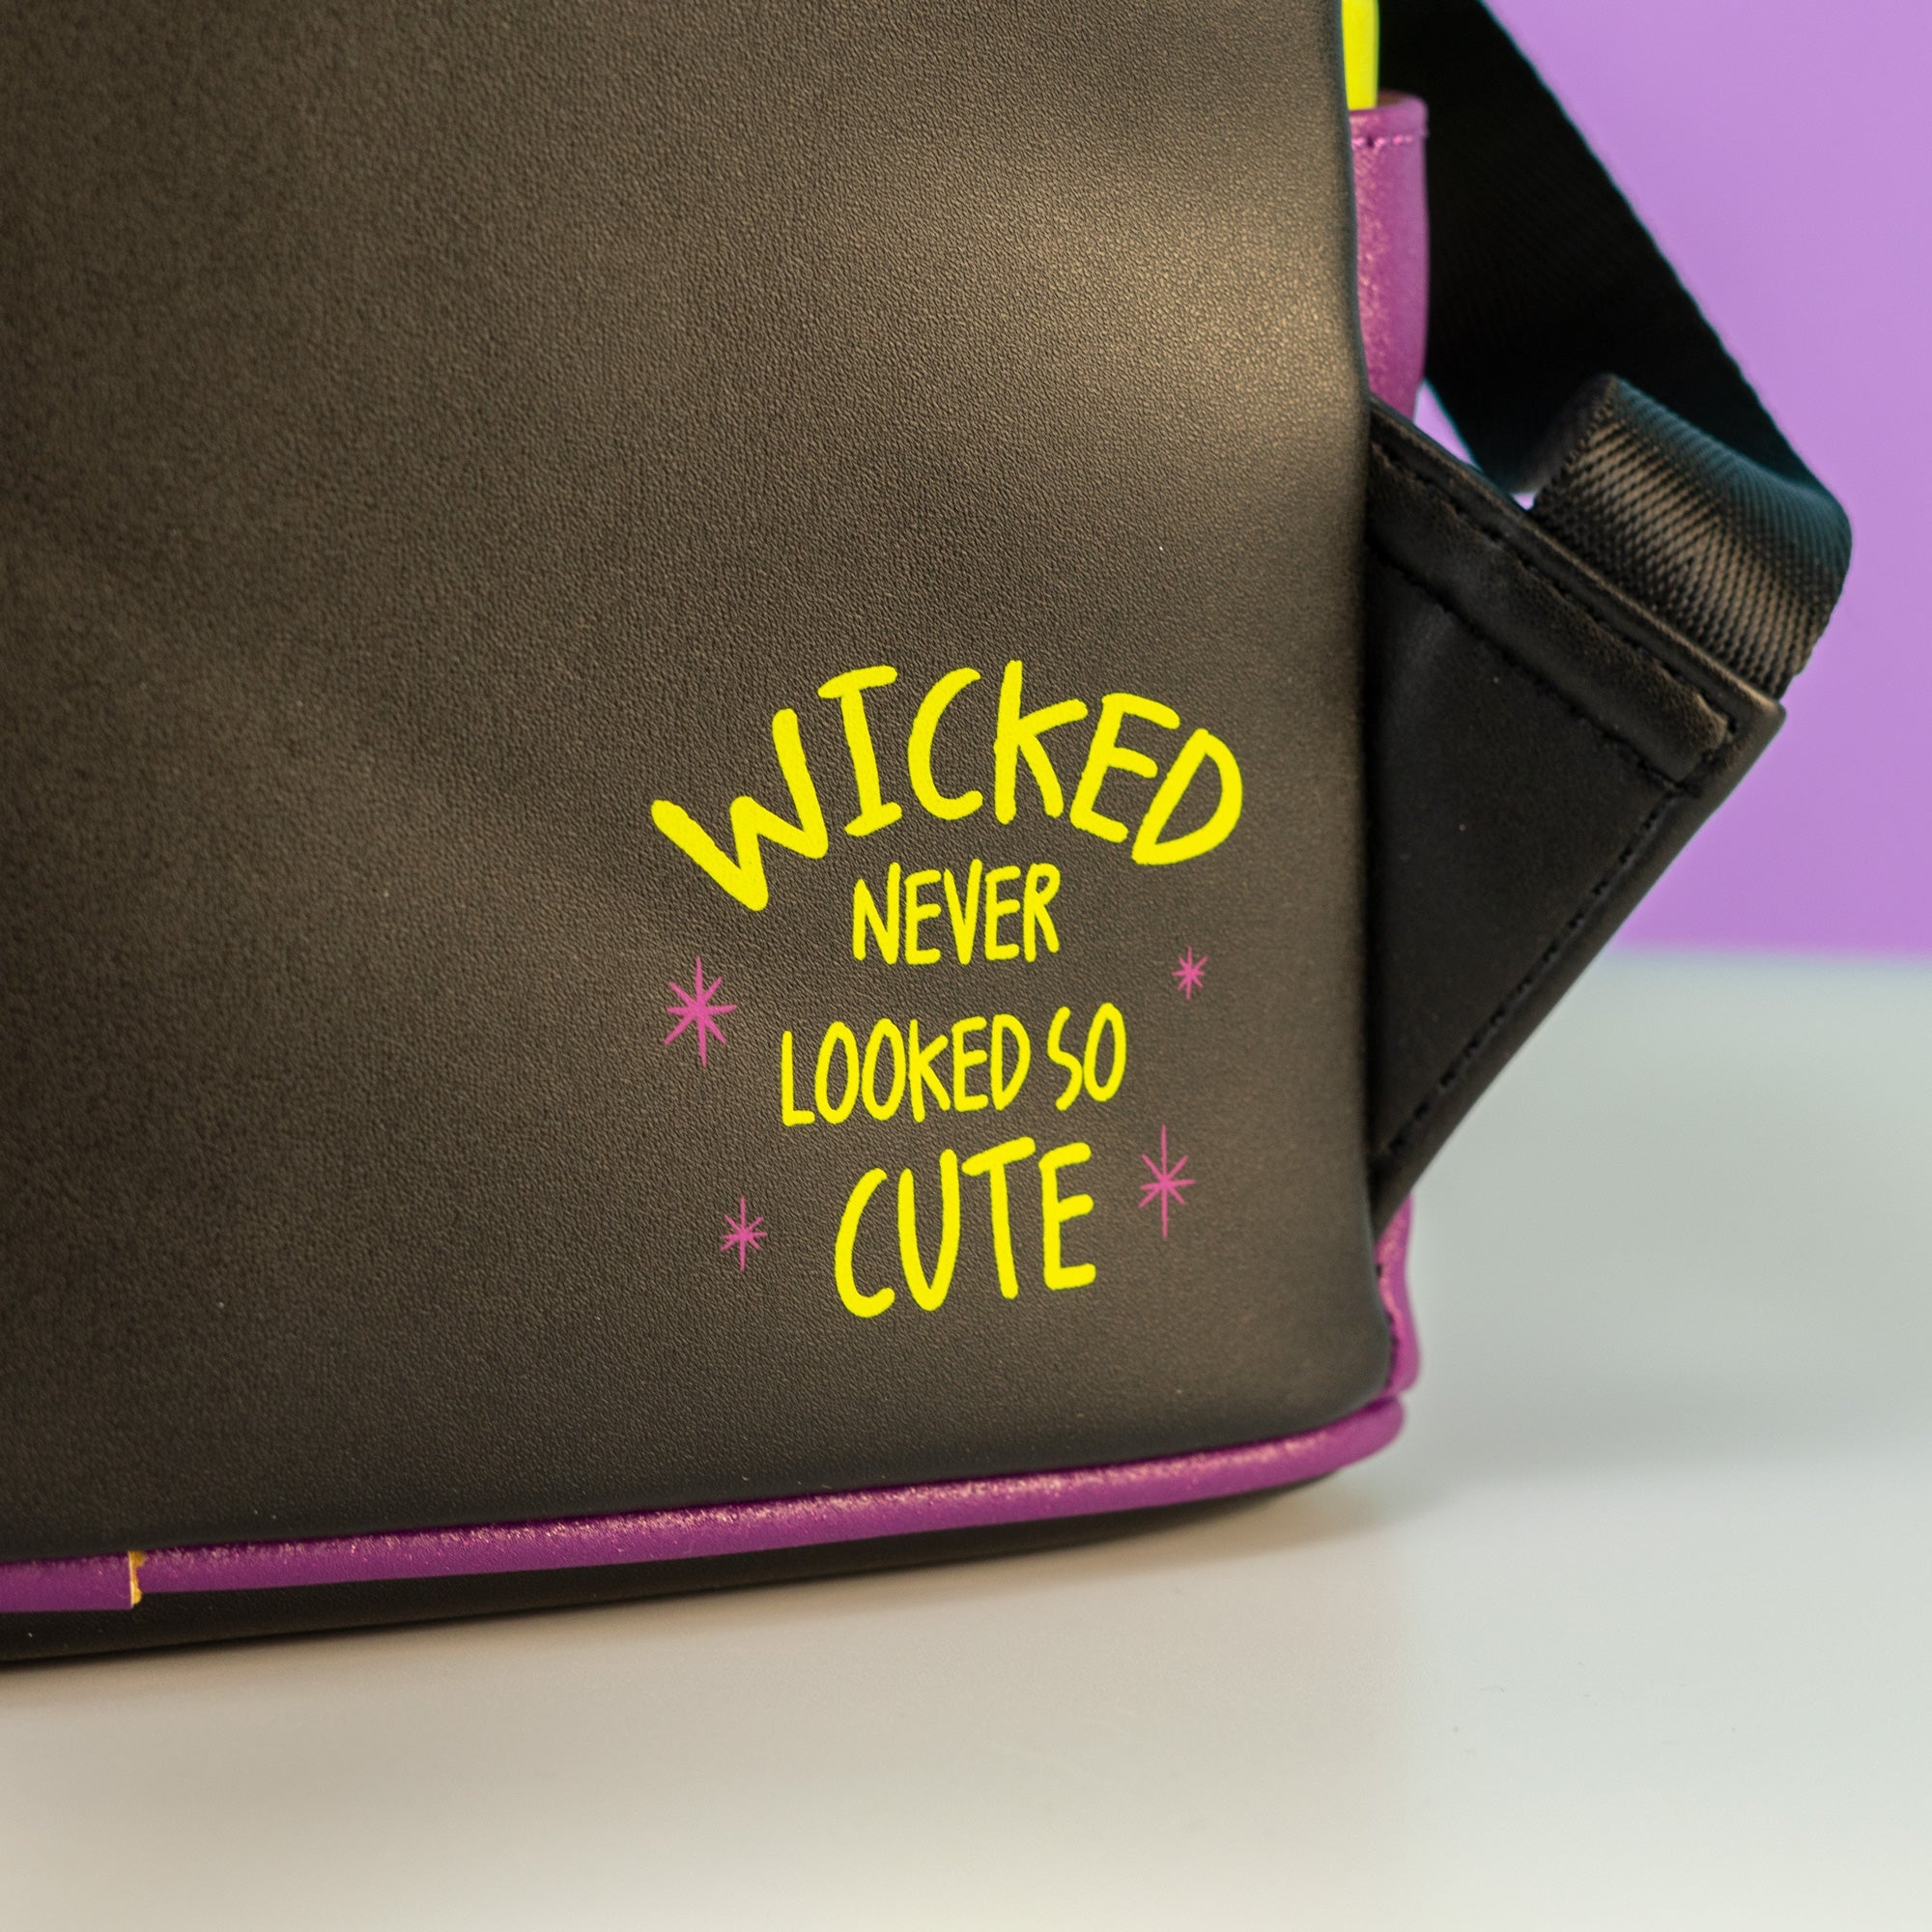 Loungefly x Disney Witch Minnie Mouse Cosplay Mini Backpack - GeekCore